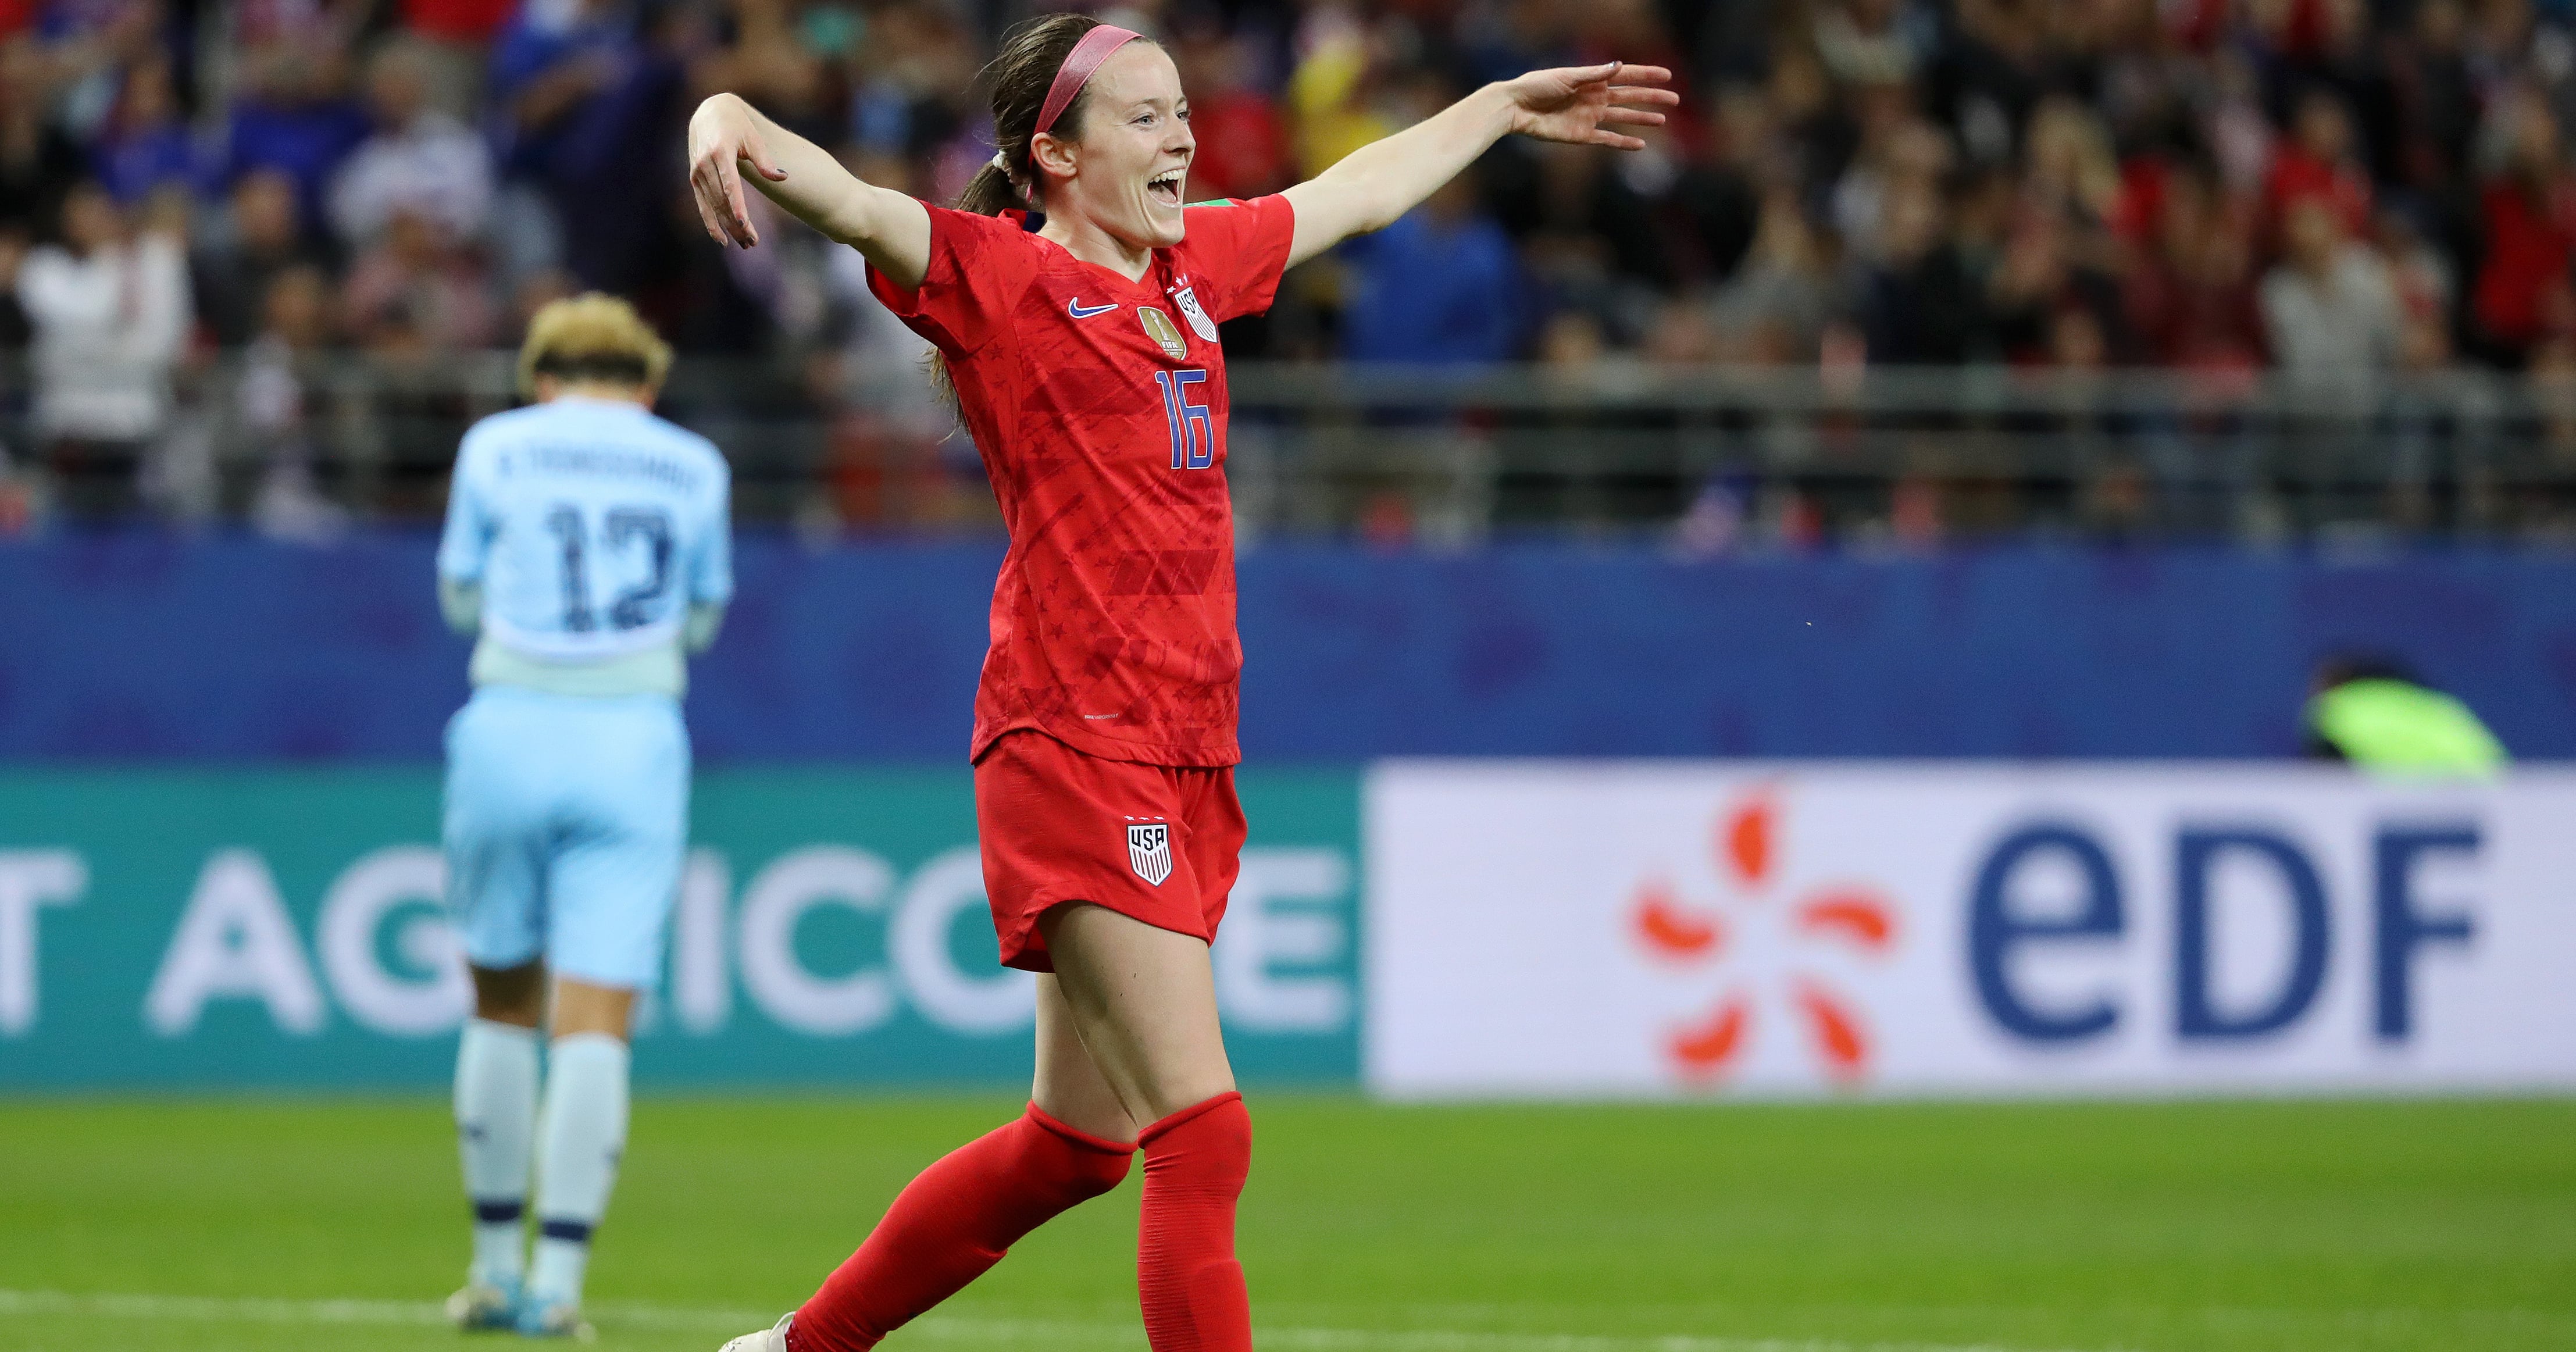 Rose Lavelle Is Already a USWNT Hero, and She’s Only Getting Started